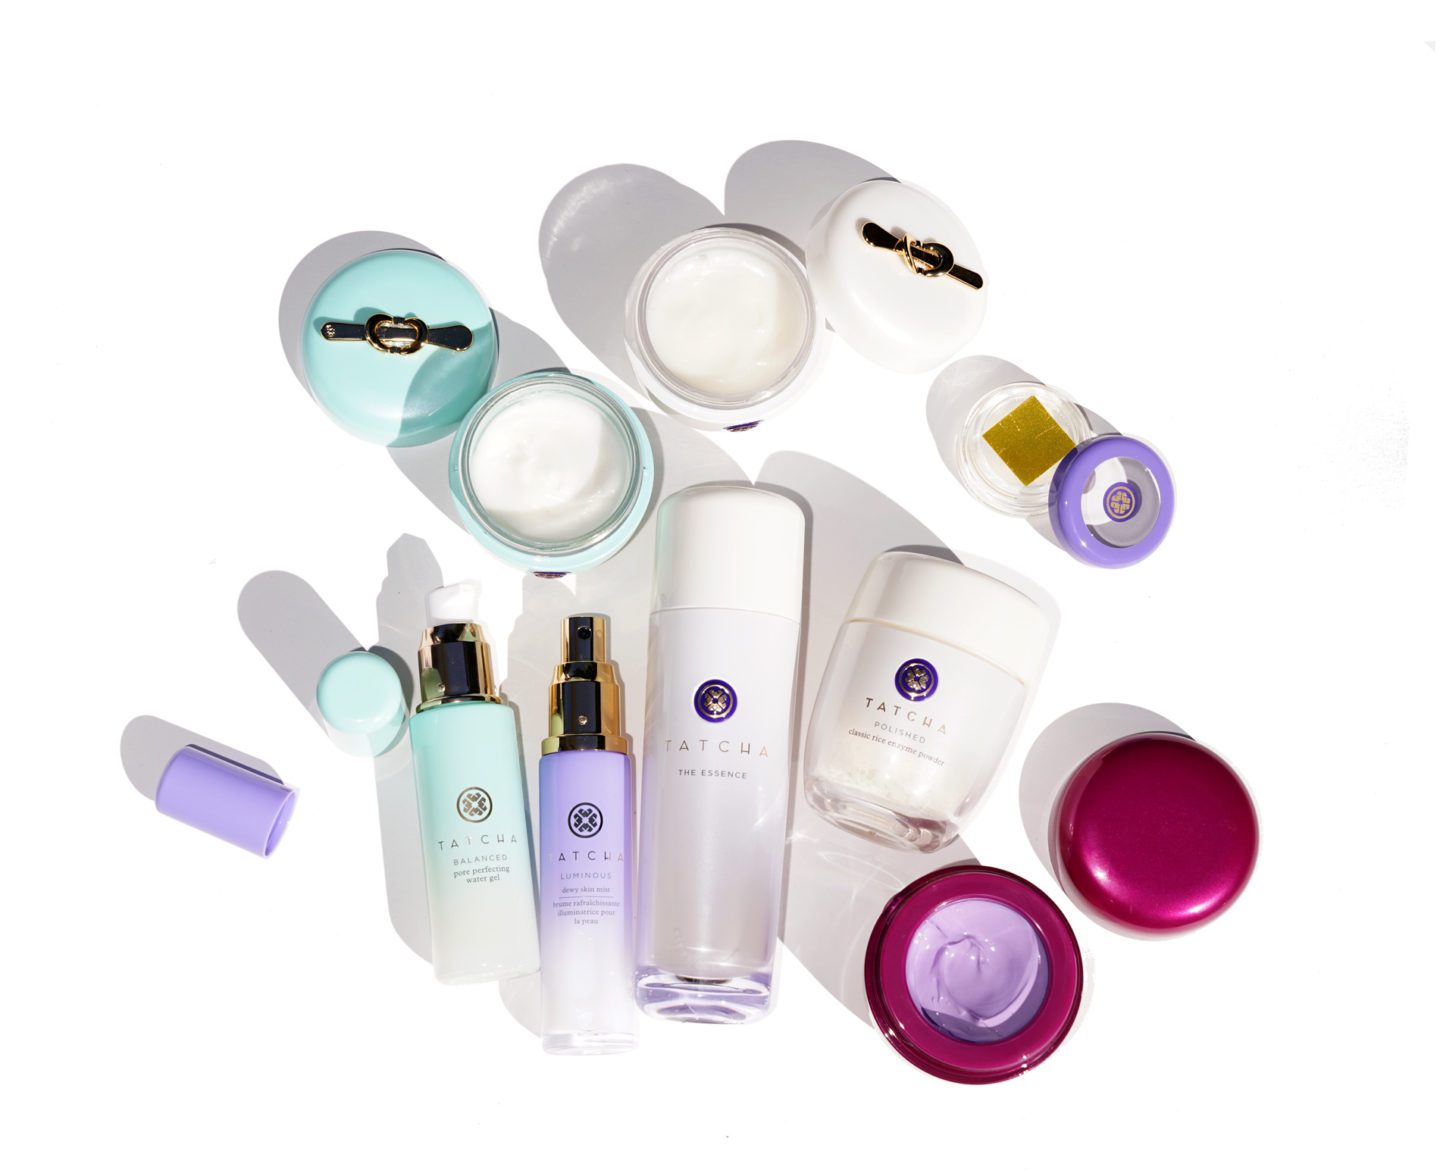 Tatcha Skincare Favorites from The Beauty Look Book